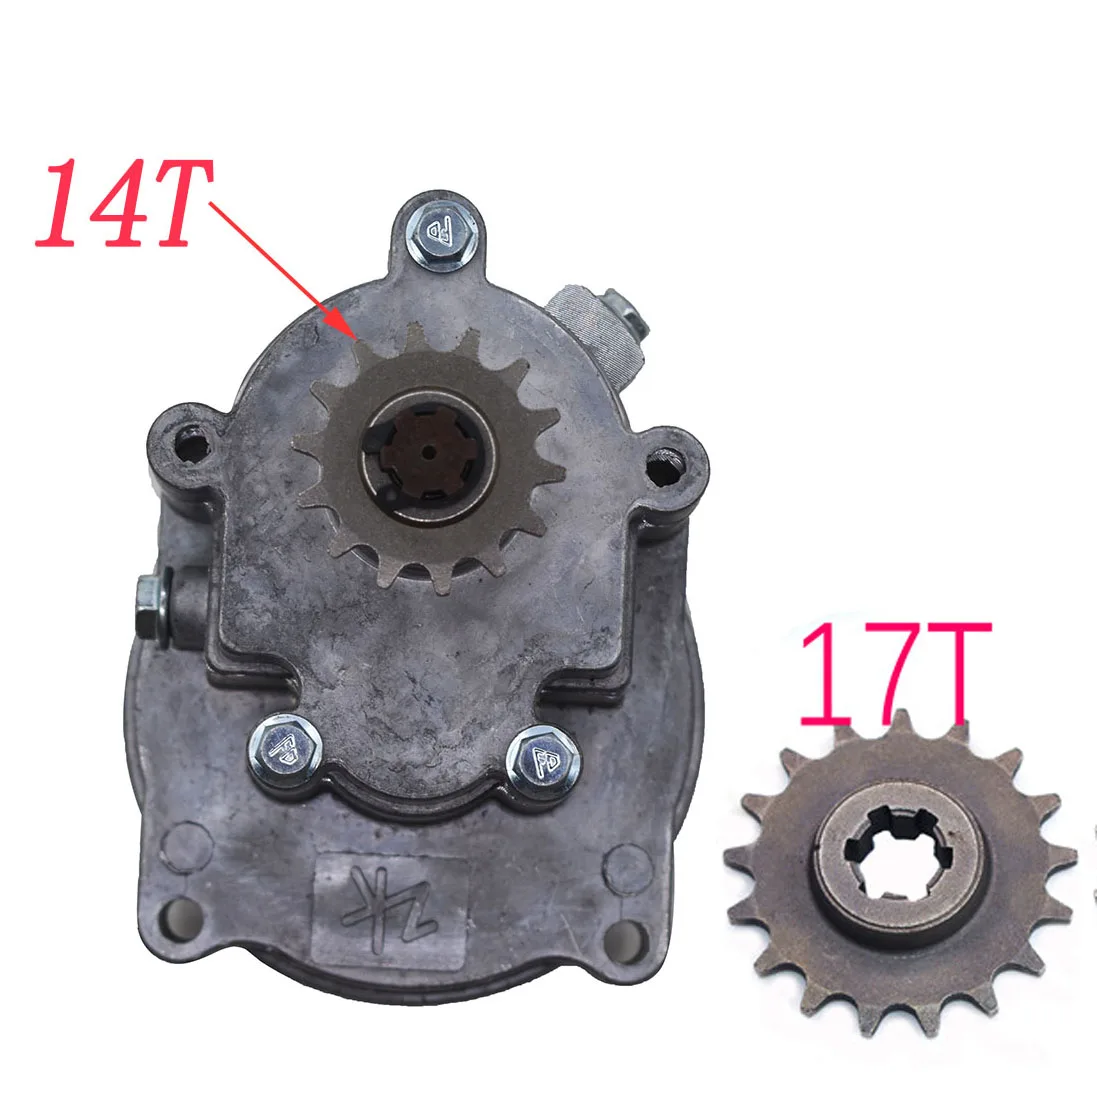 Race-Guy T8F 20 Tooth Sprocket Gear Box For 2 Stroke 33cc 43cc 49cc Engine Parts Ty Rod II Go Kart Mini Bike Go Ped Scooter Xtreme 